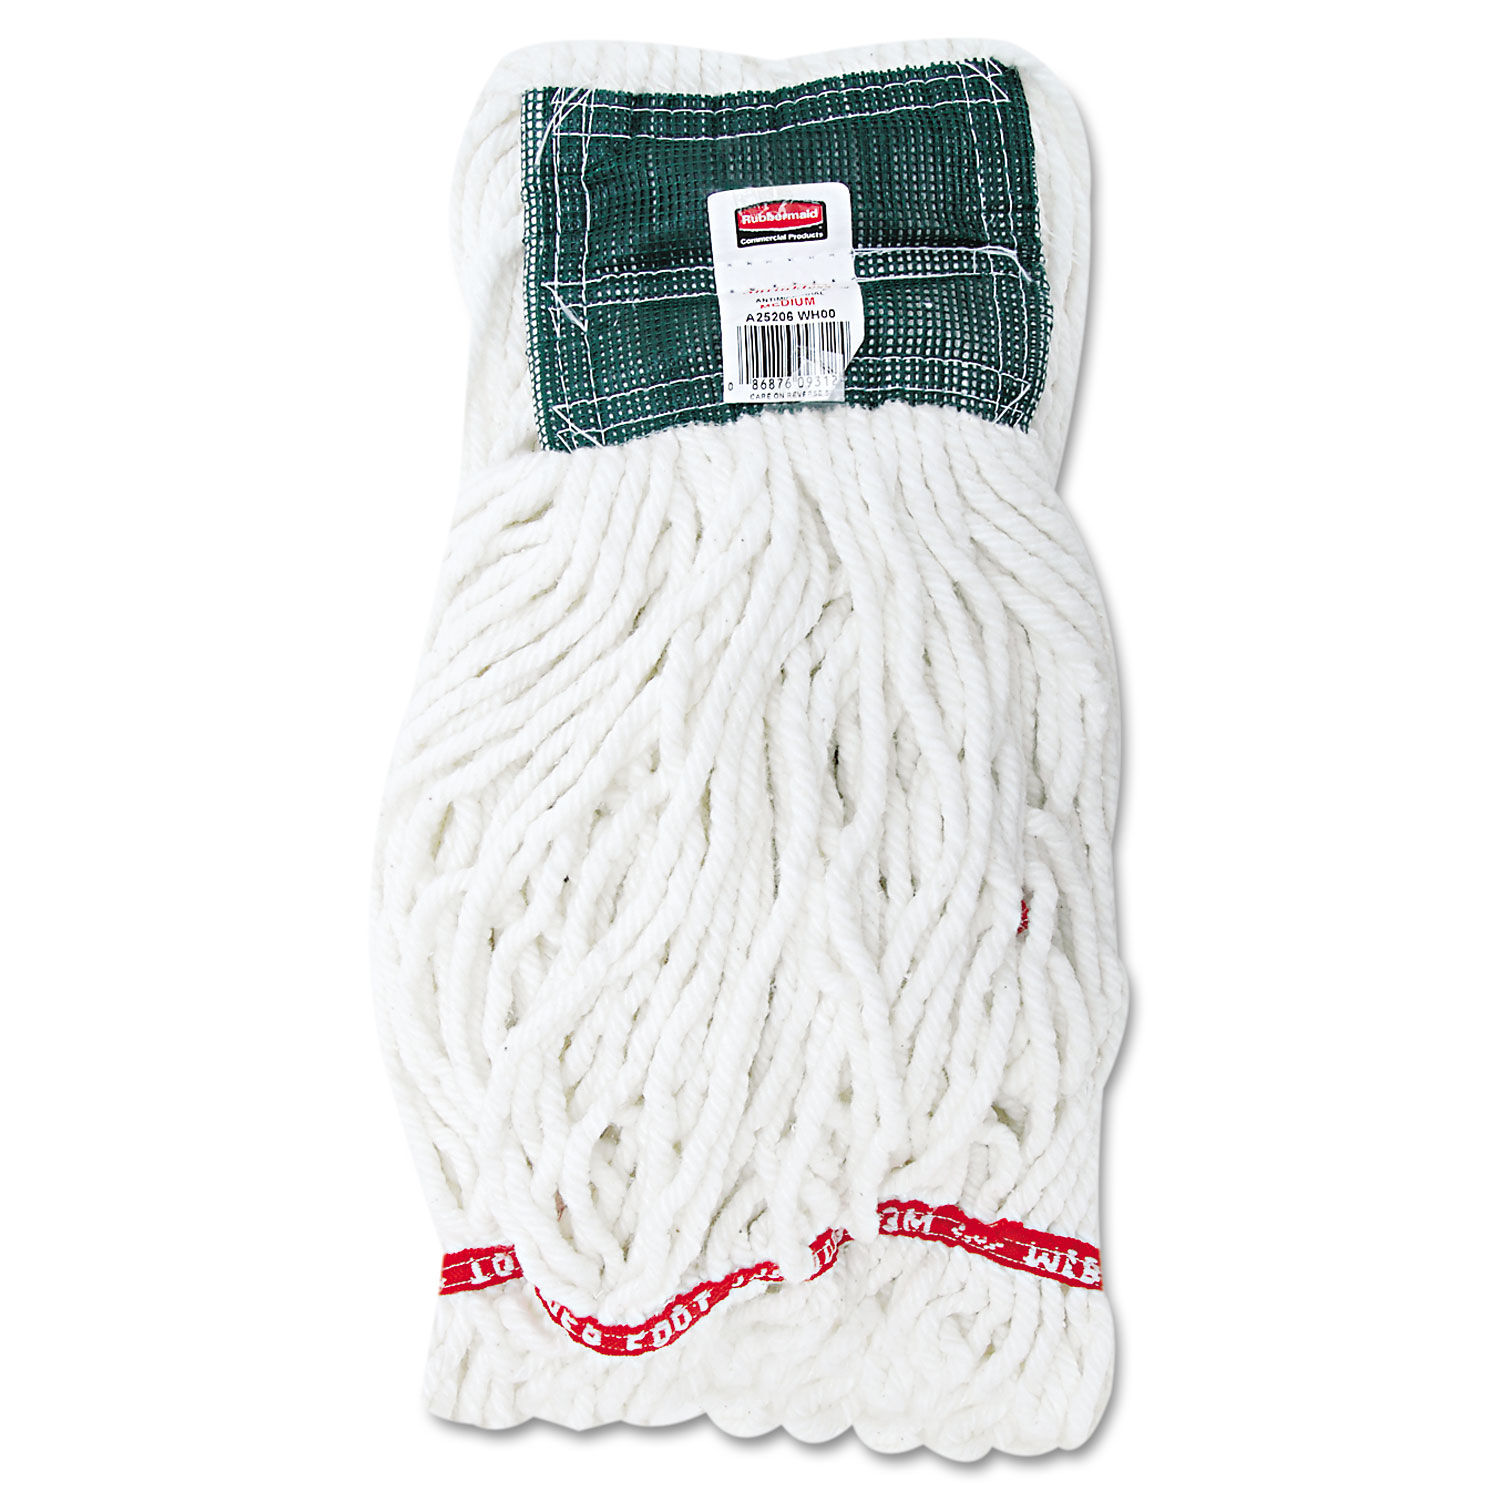 Web Foot Shrinkless Looped-End Wet Mop Head Cotton/Synthetic, Medium, White